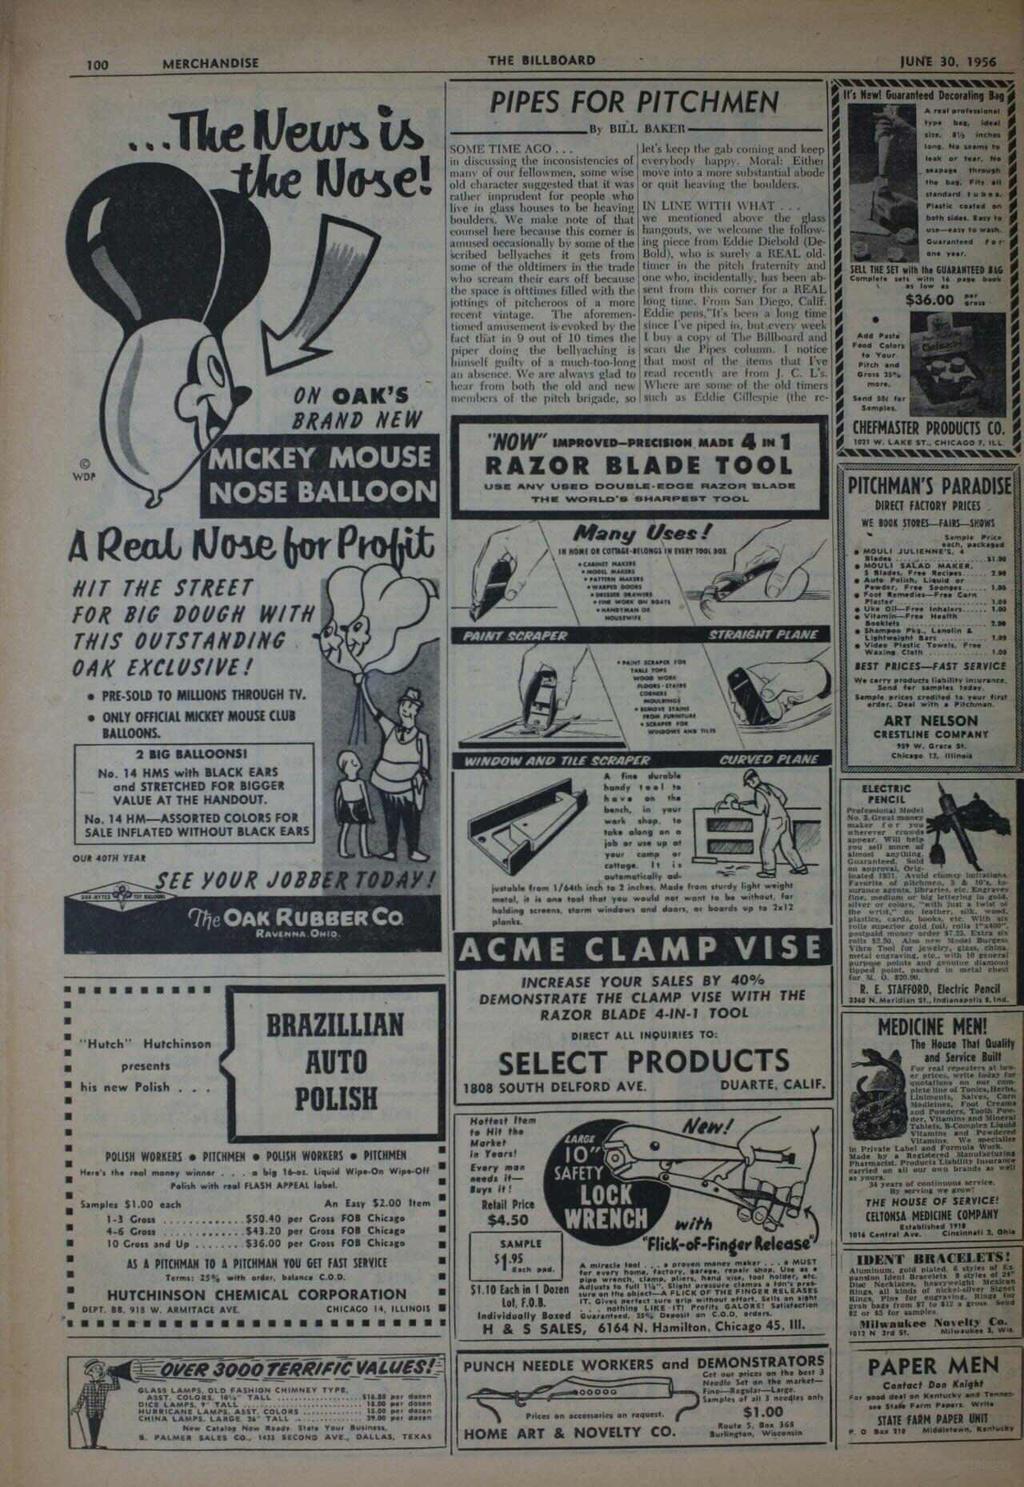 00 MERCHANDSE THE BLLBOARD JUNE 30. 956 A Real, Rose (lot HT THE STREET FOR BG DOUGH WTH THS OUTSTANDNG OAK EXC US/PE! PRE -SOLD TO MLLONS THROUGH TV. ONLY OFFCAL MCKEY MOUSE CLUB BALLOONS.